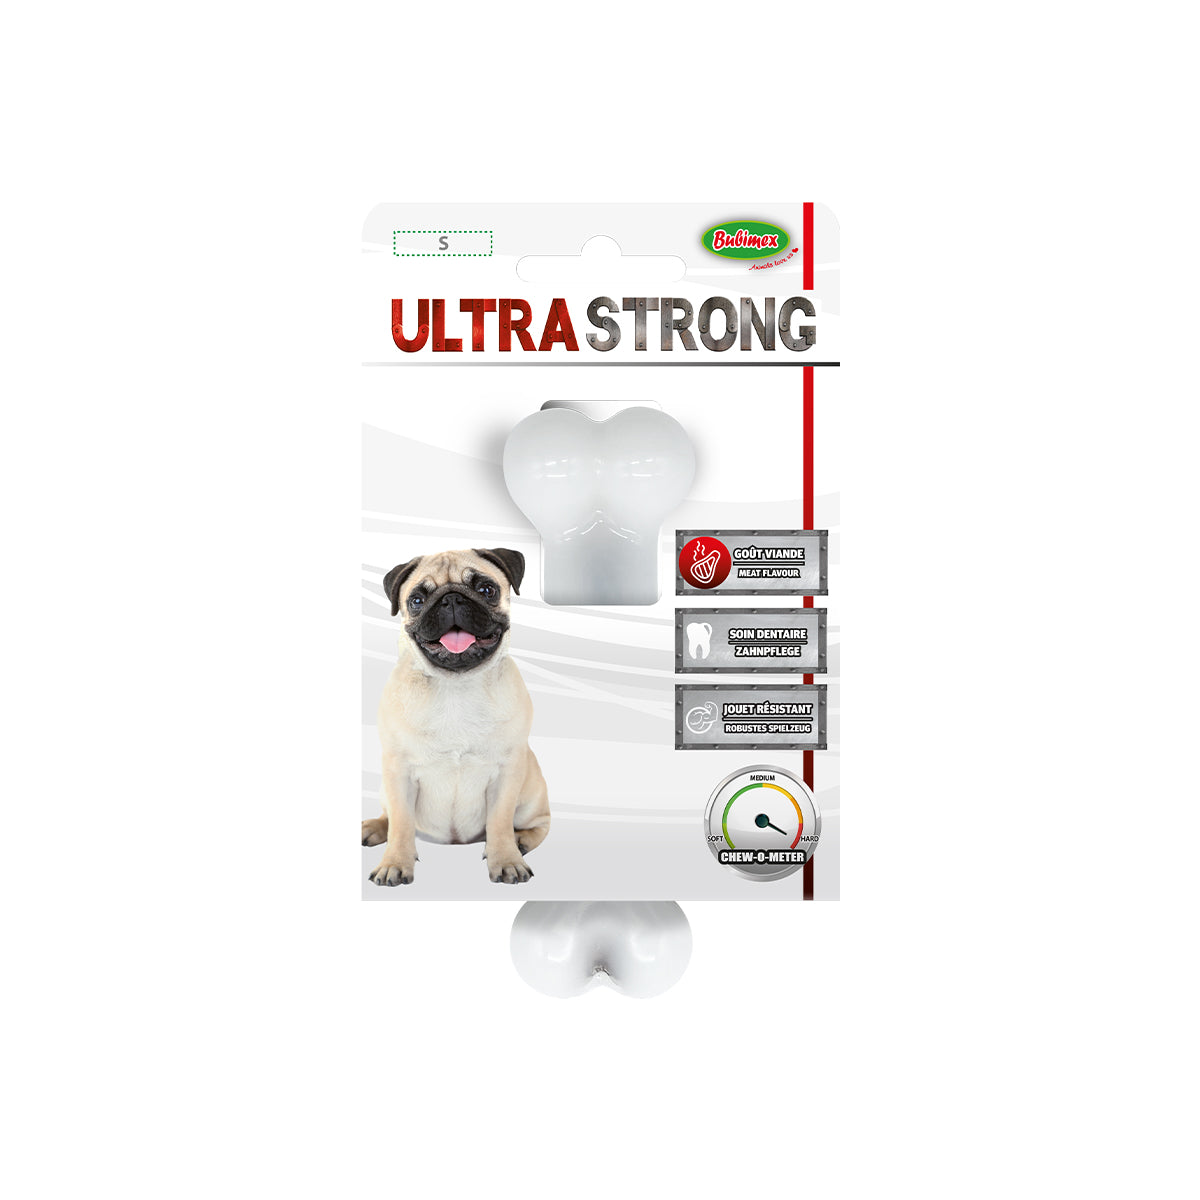 OS FOURRE ULTRASTRONG S